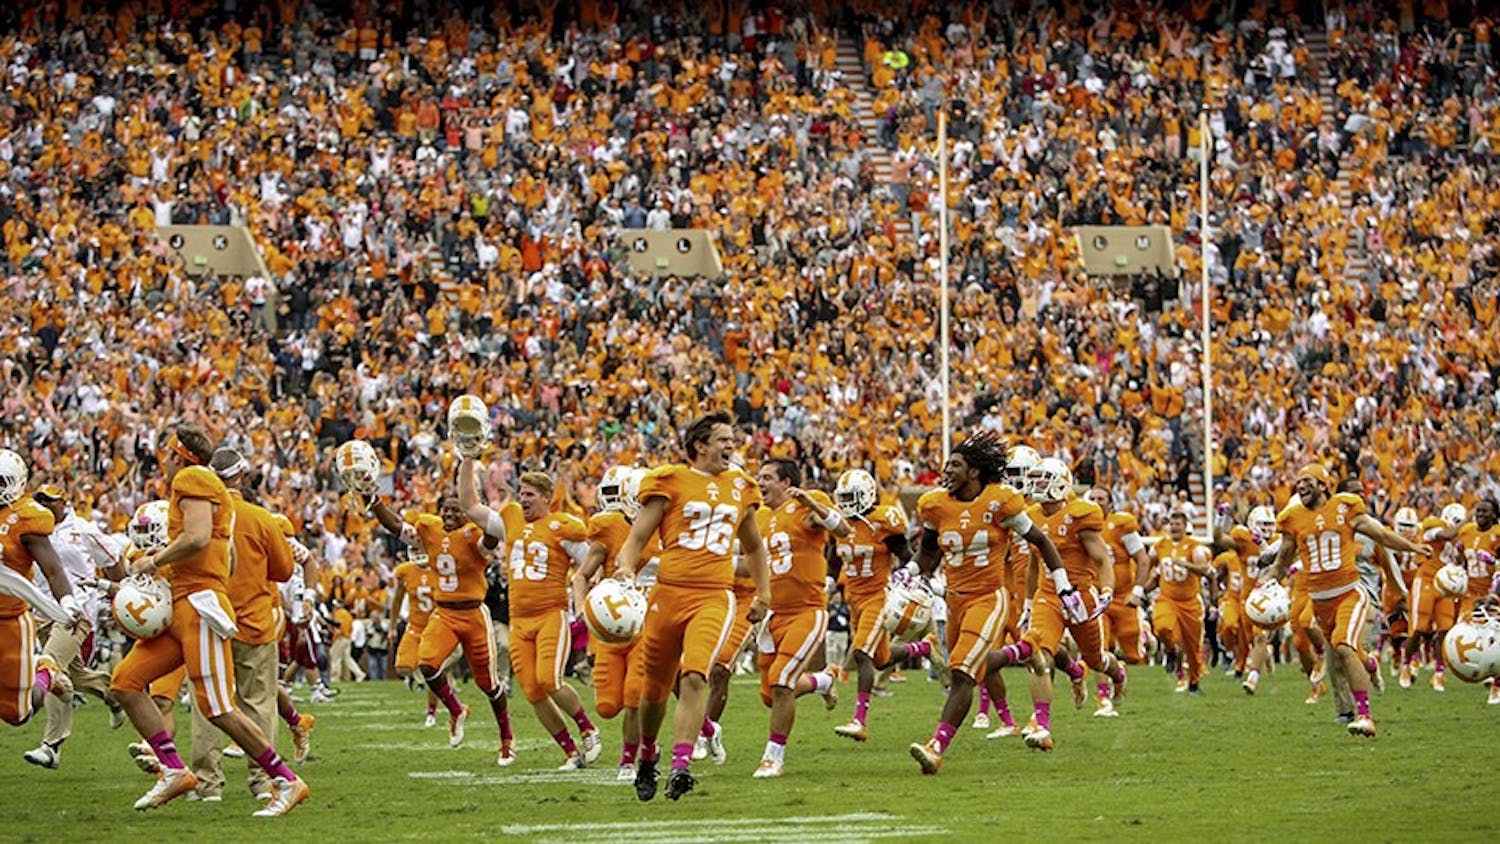 Players celebrate after Tennessee kicked the game-winning field goal. The Tennessee Volunteers defeated the South Carolina Gamecocks, 23-21, at Neyland Stadium in Knoxville, Tennessee, on Saturday, October 19, 2013. (Tim Dominick/The State/MCT)